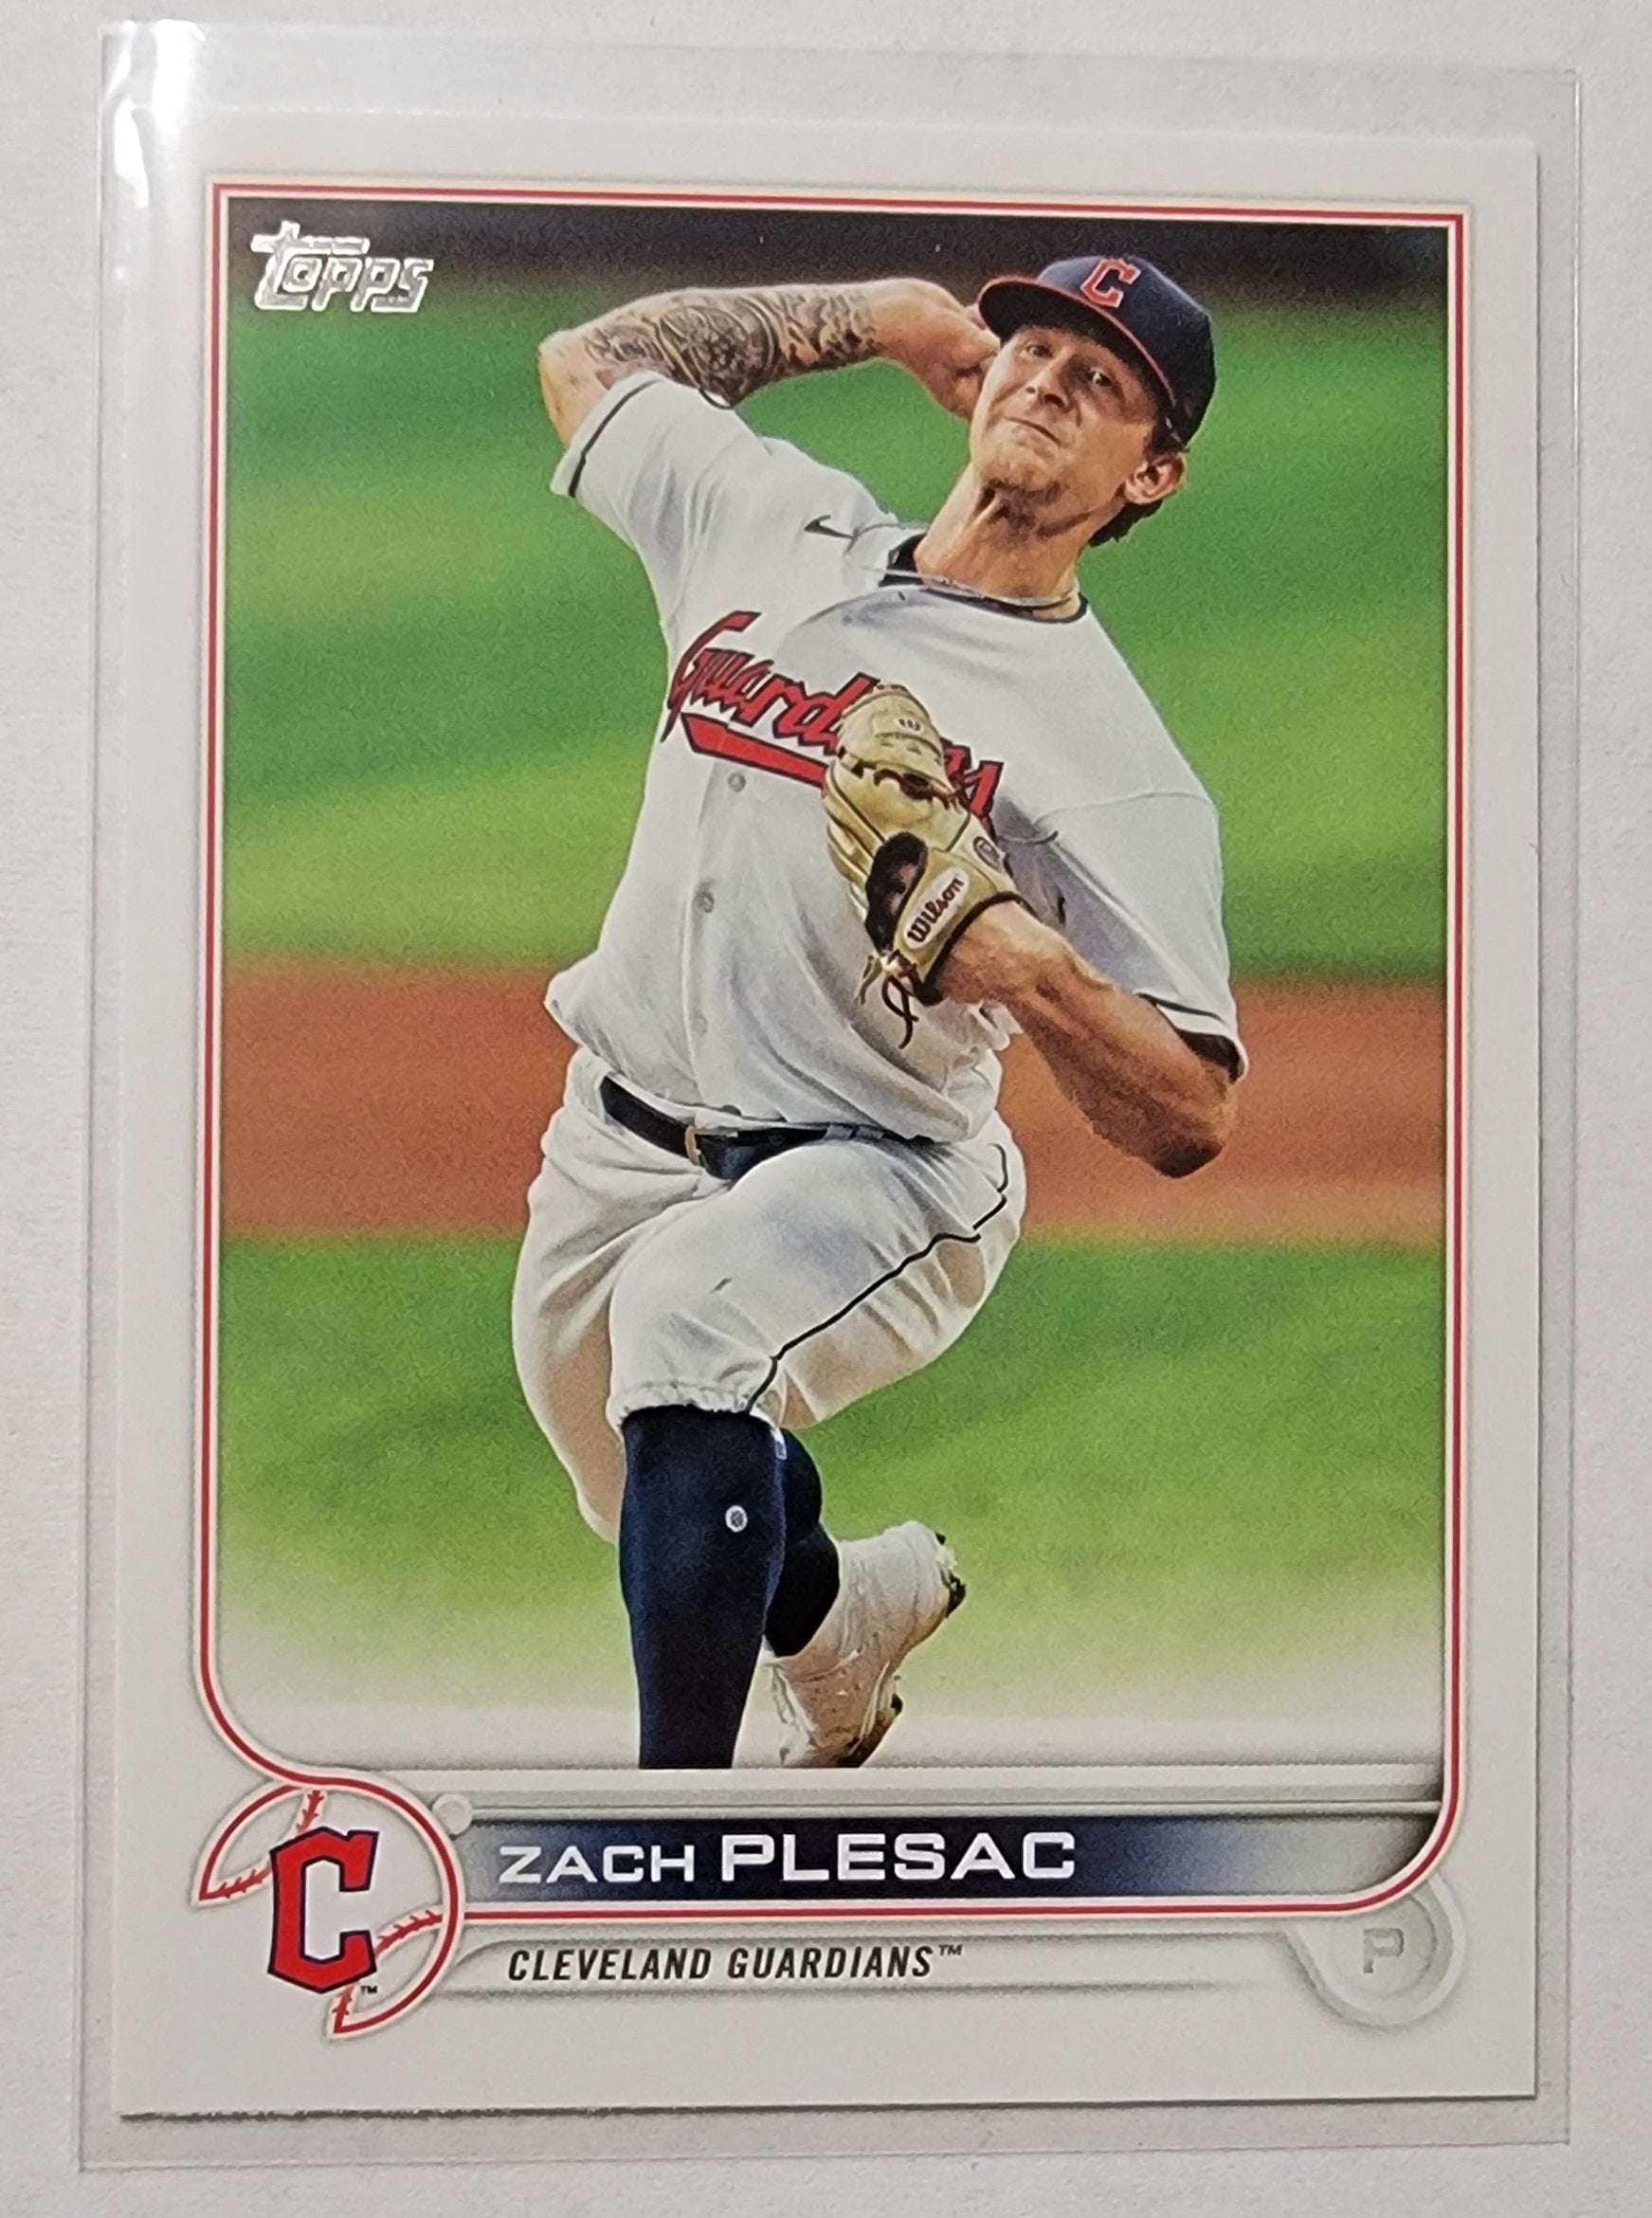 2022 Topps Series 2 Zach Plesac Baseball Card AVM1 simple Xclusive Collectibles   